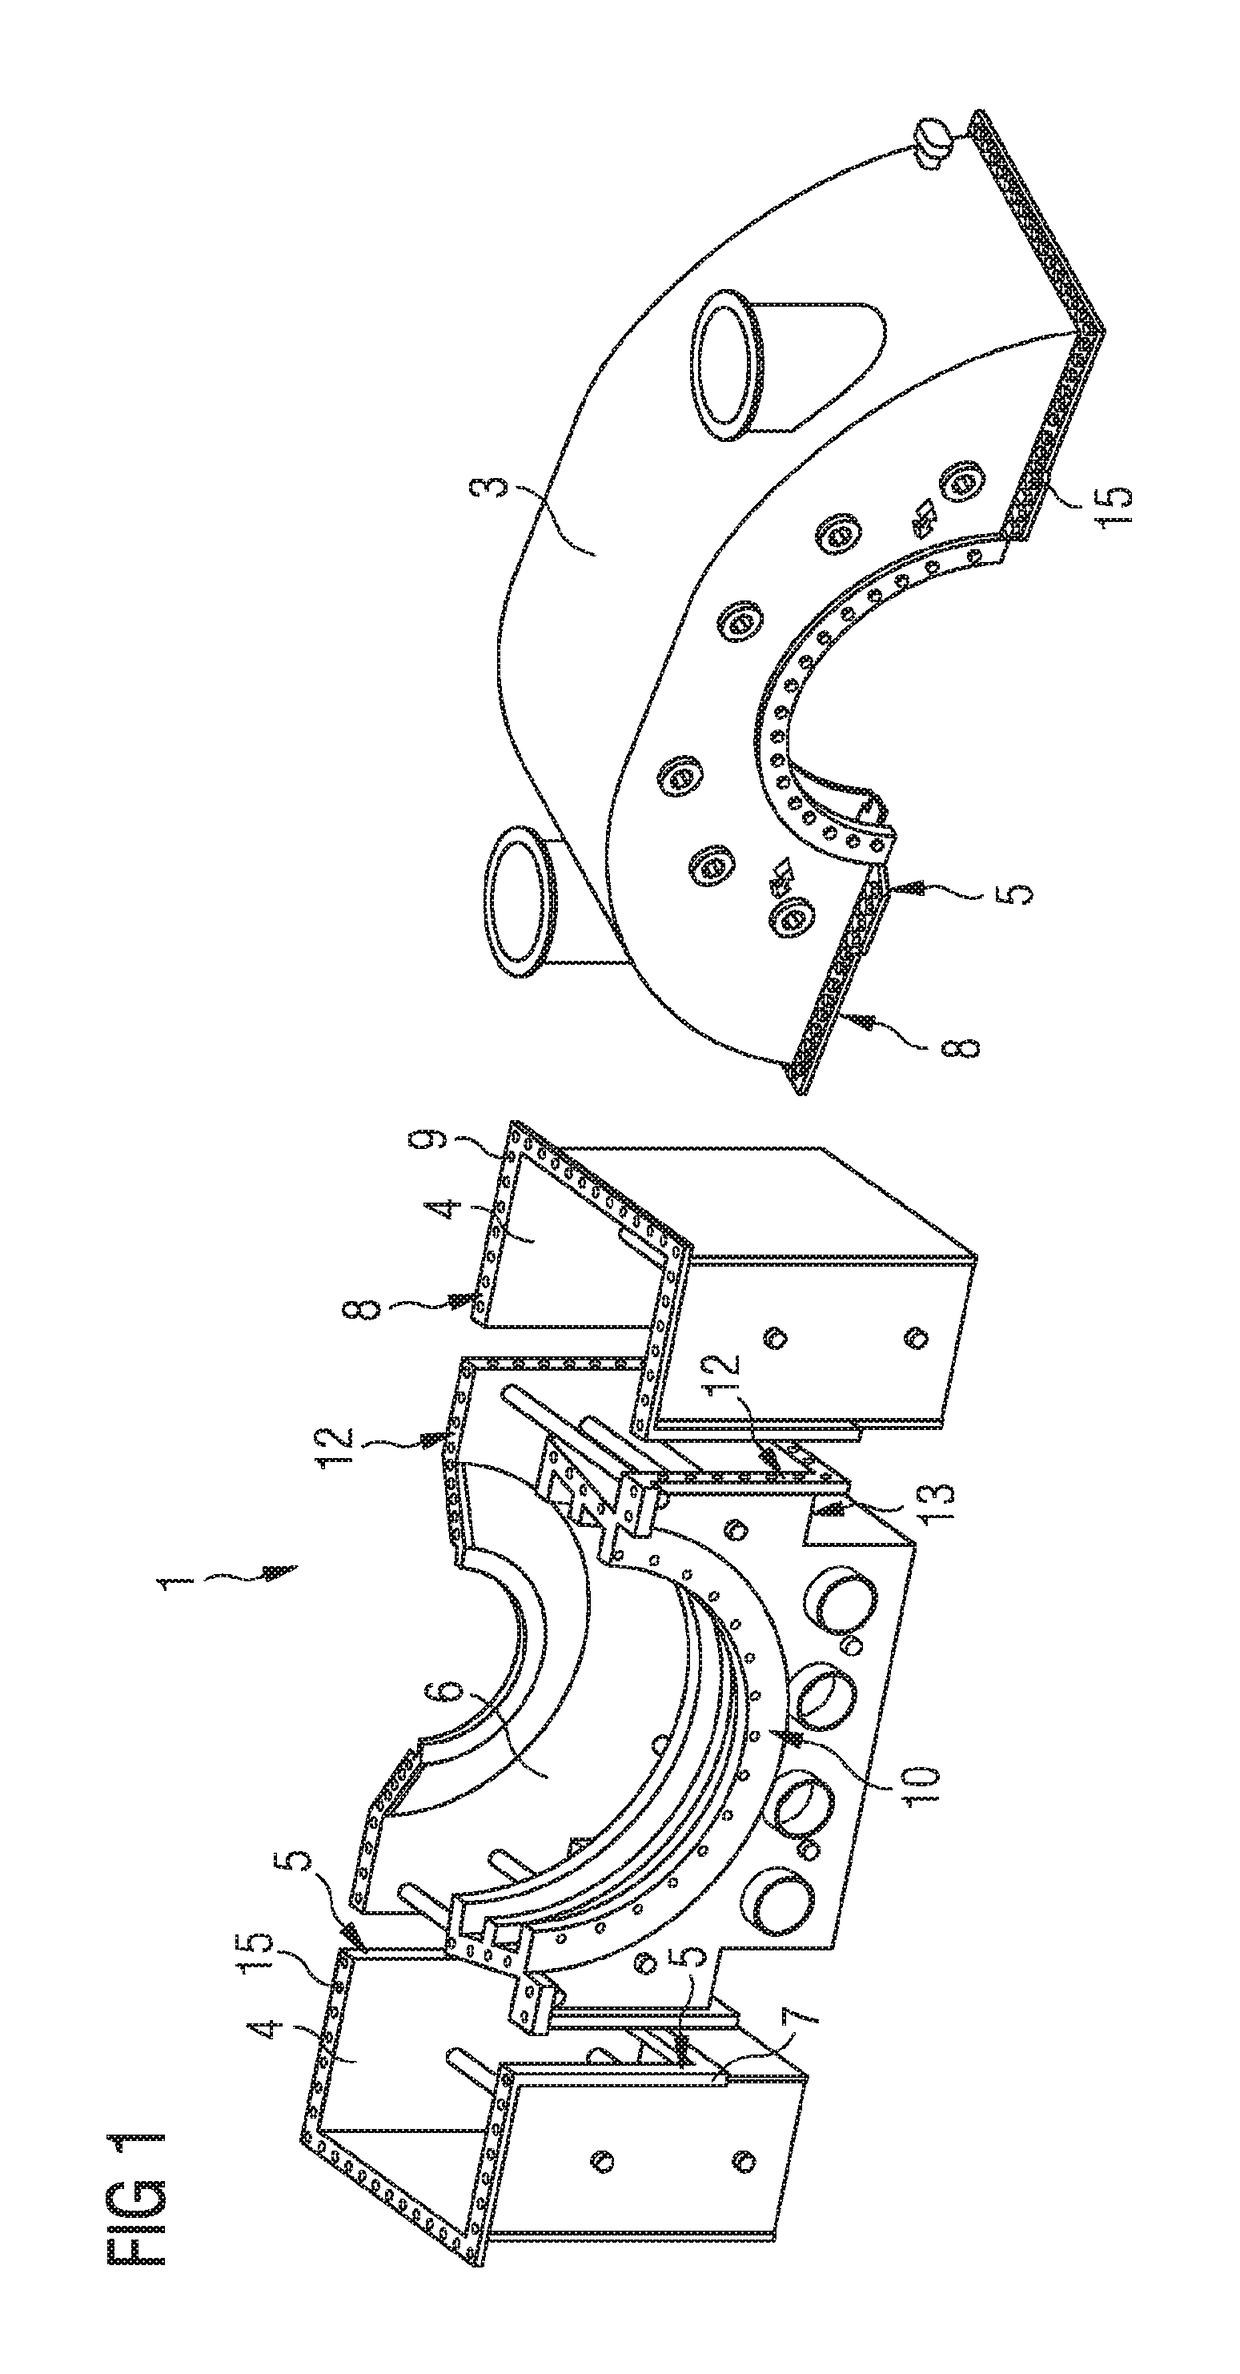 Exhaust-steam casing for a steam turbine and assembly system